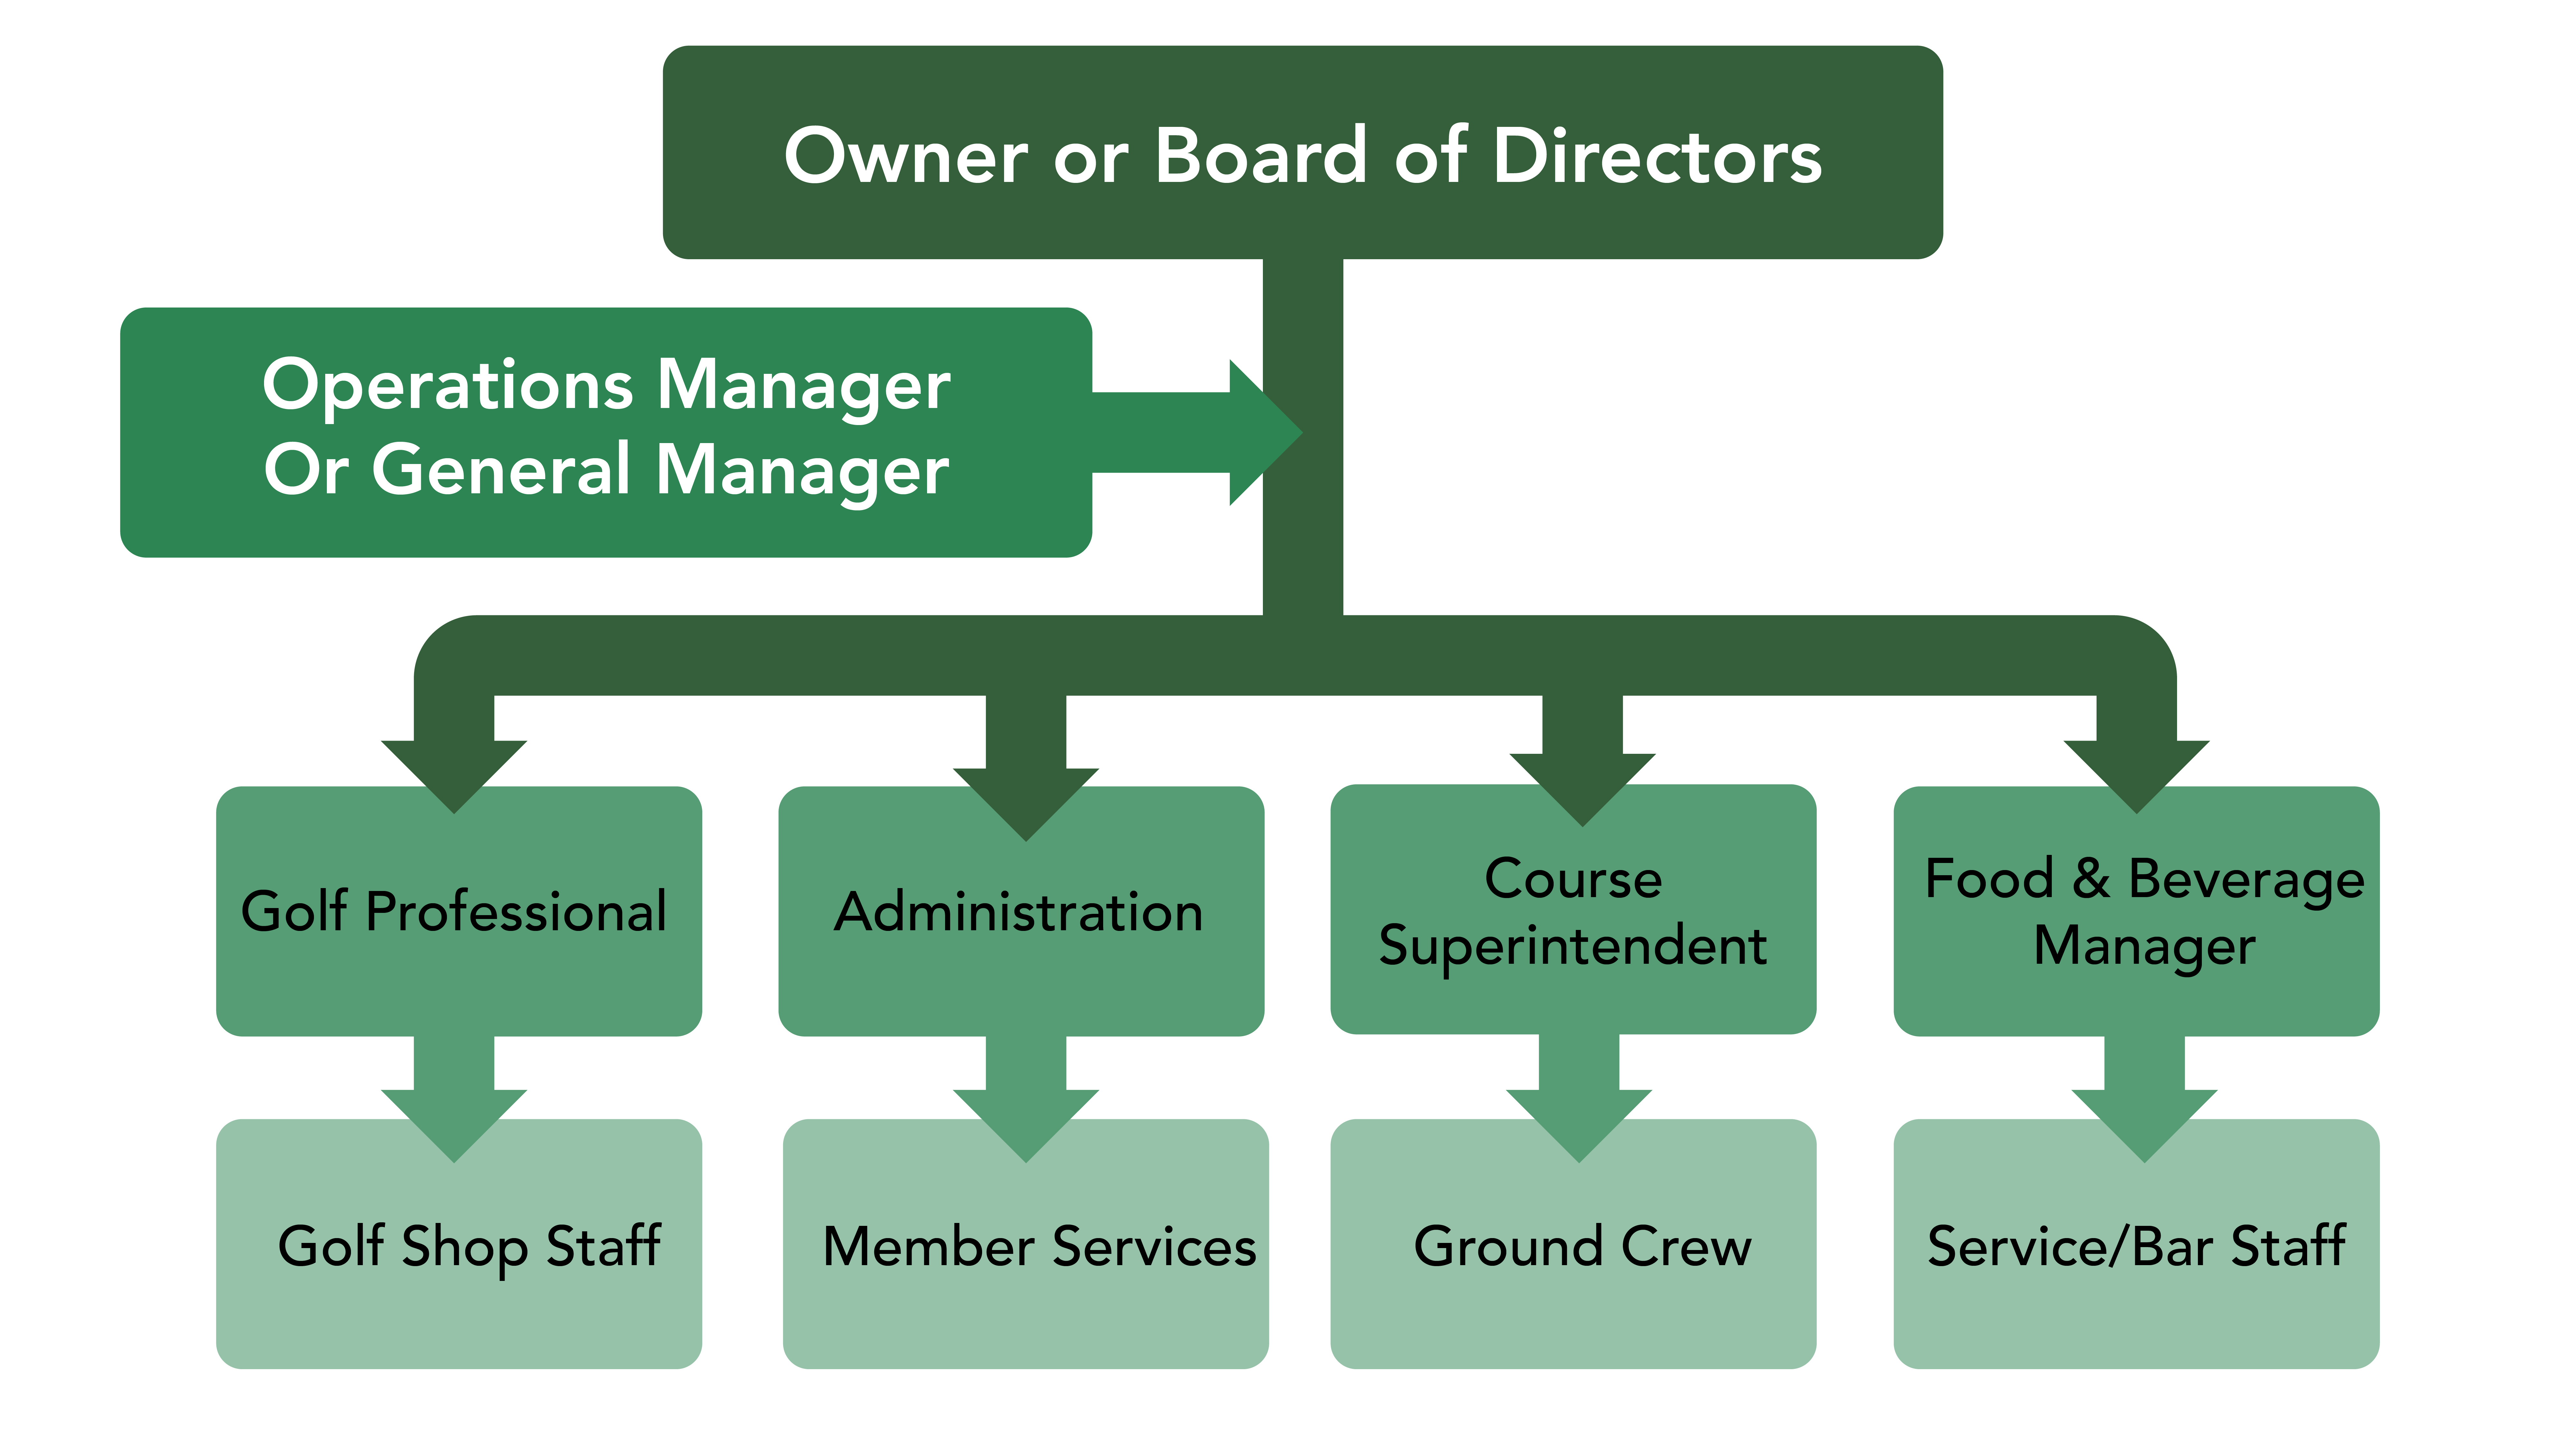 A golf course organizational structure includes the owners or board of directors at the top level and then the general manager next. The third level includes: the golf professionals, administration, course super indent and food and beverage manager. Below this are the employees that support those functions.